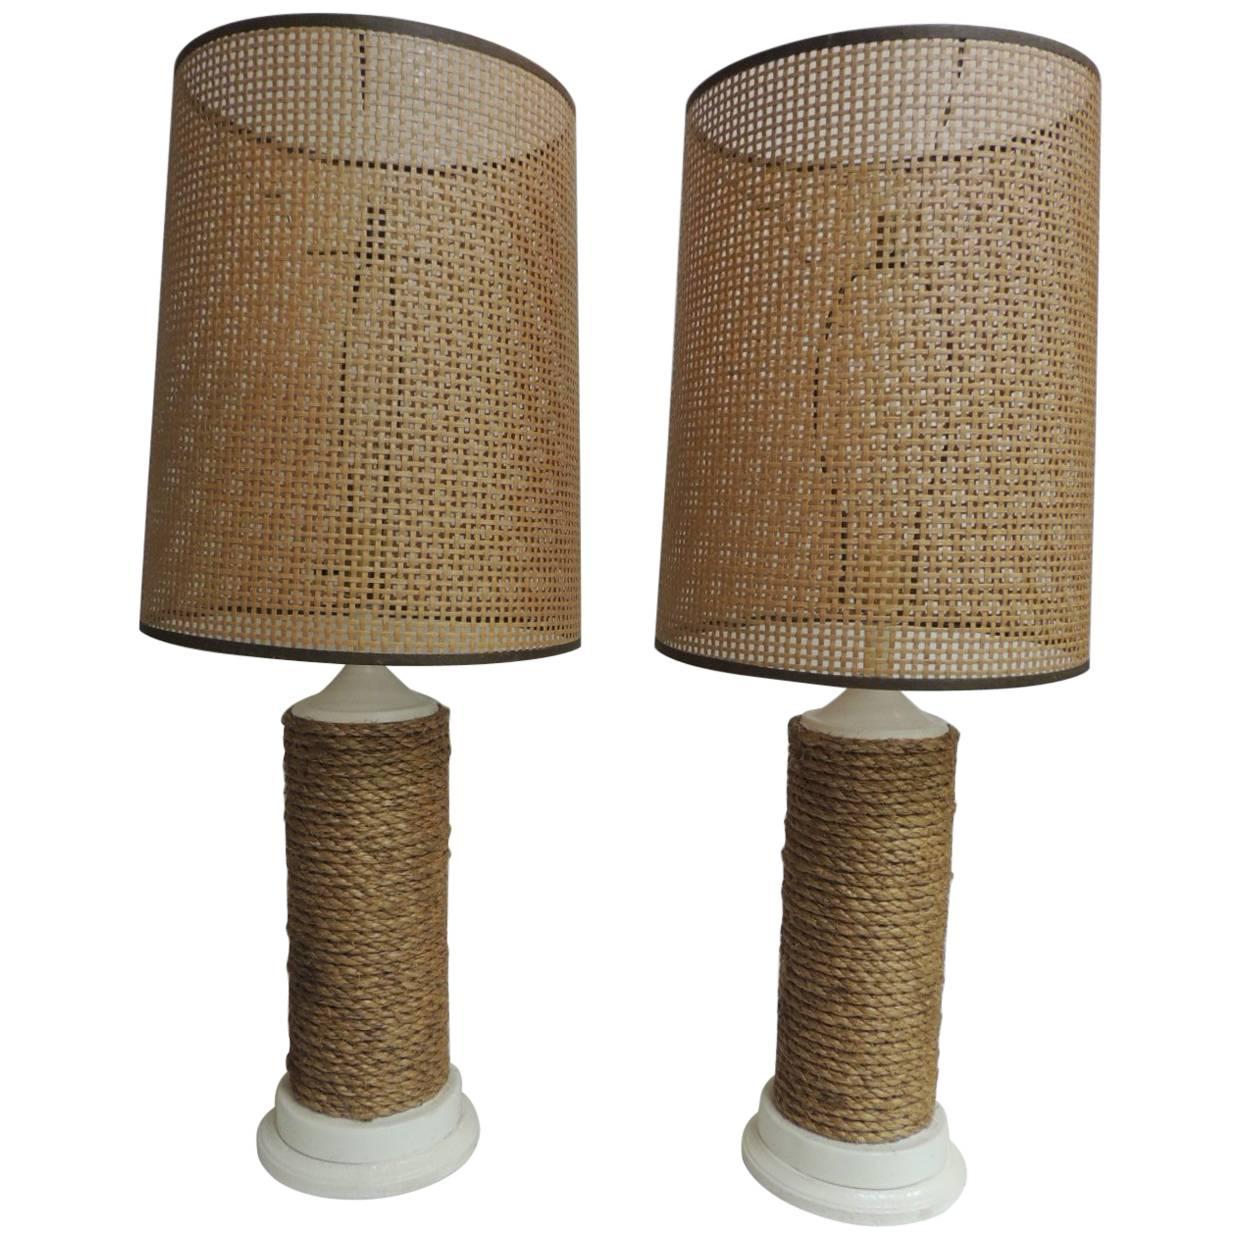 Pair of Vintage Nautical Wood Lamps with Rattan Woven Shades